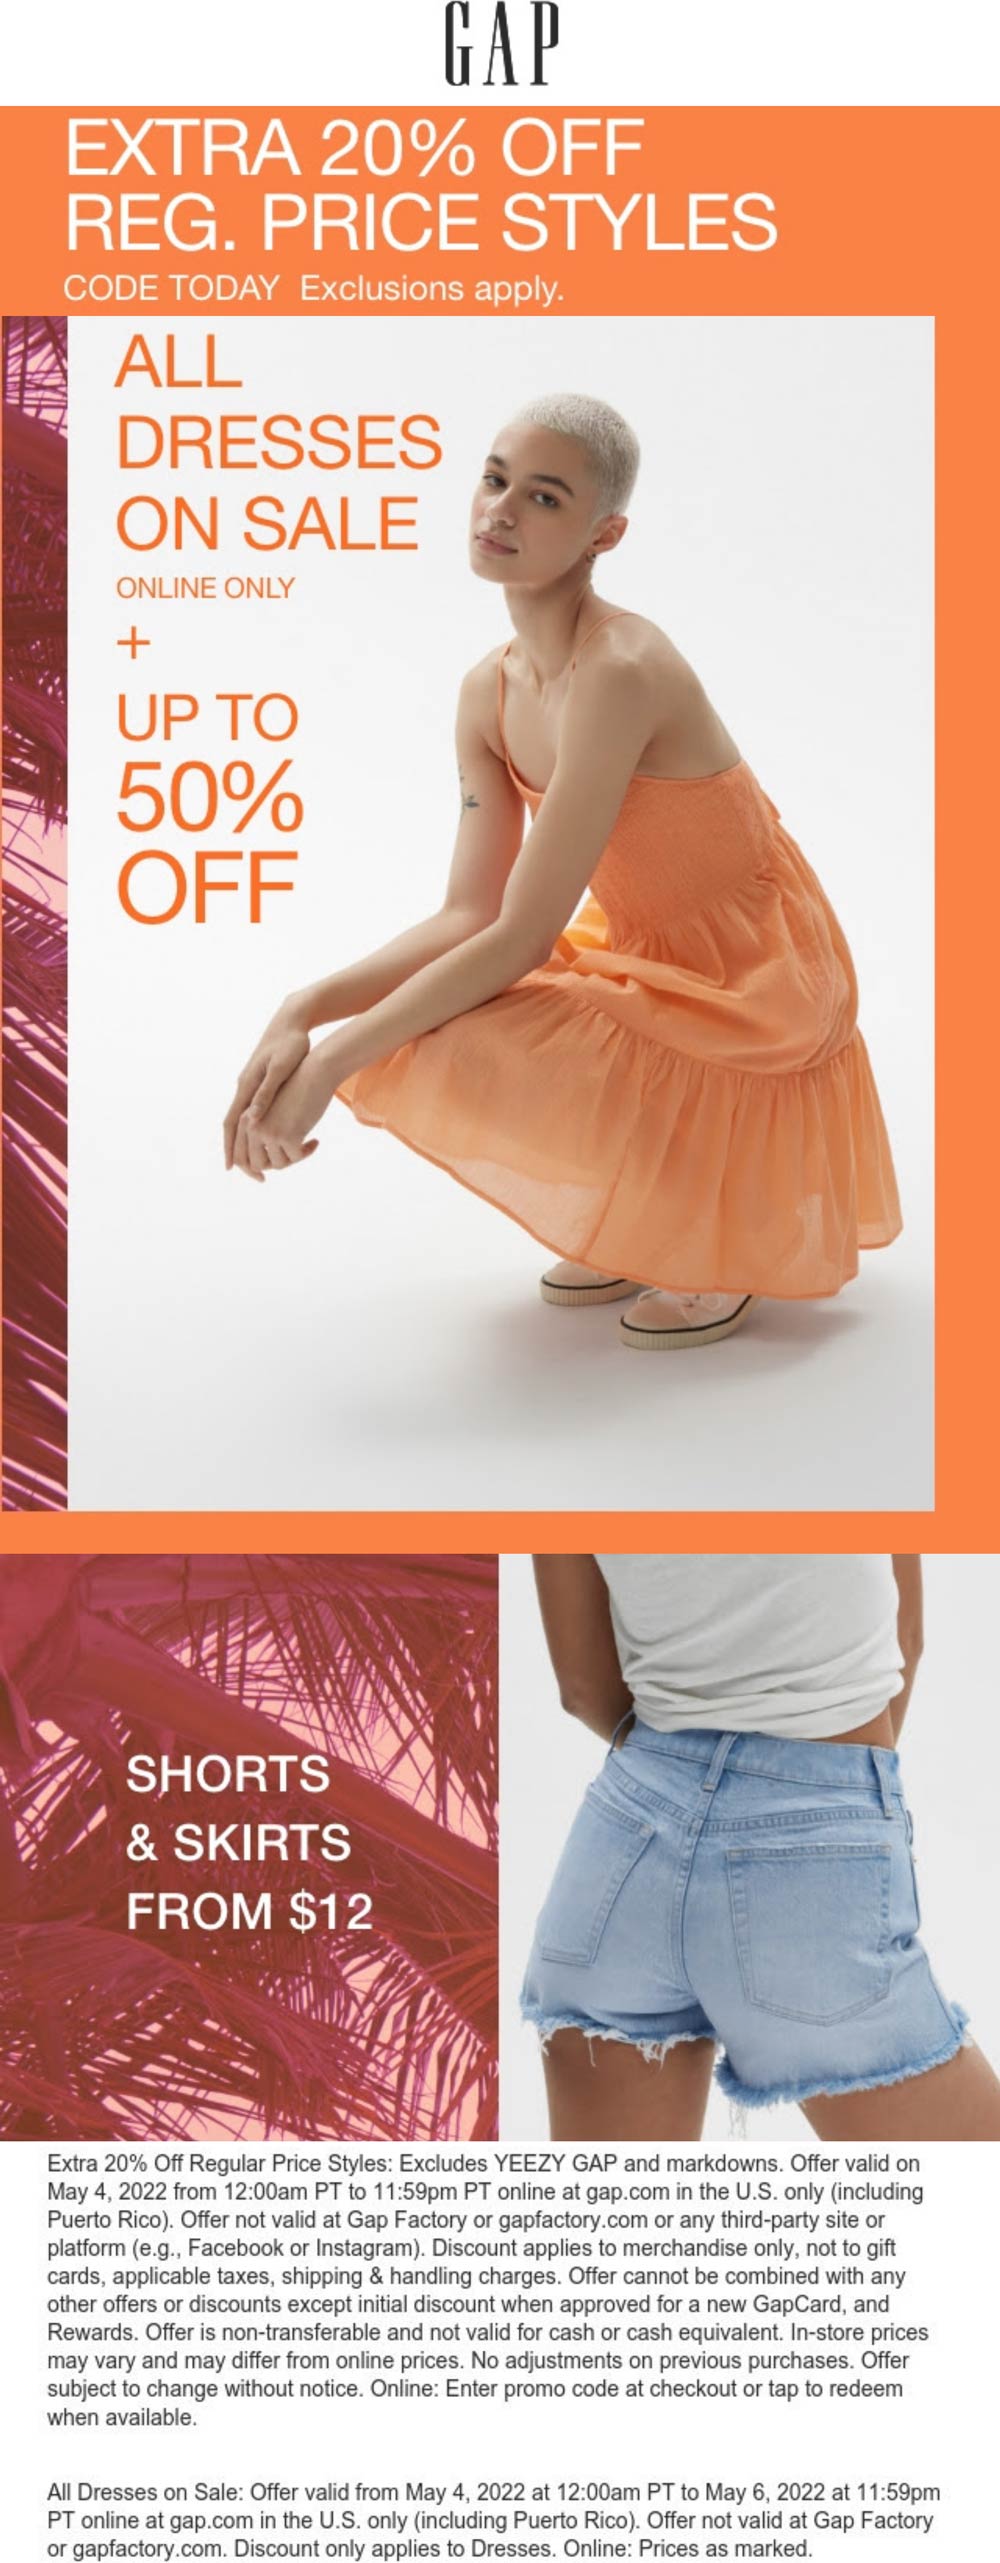 Gap stores Coupon  Extra 20% off online today at Gap via promo code TODAY #gap 